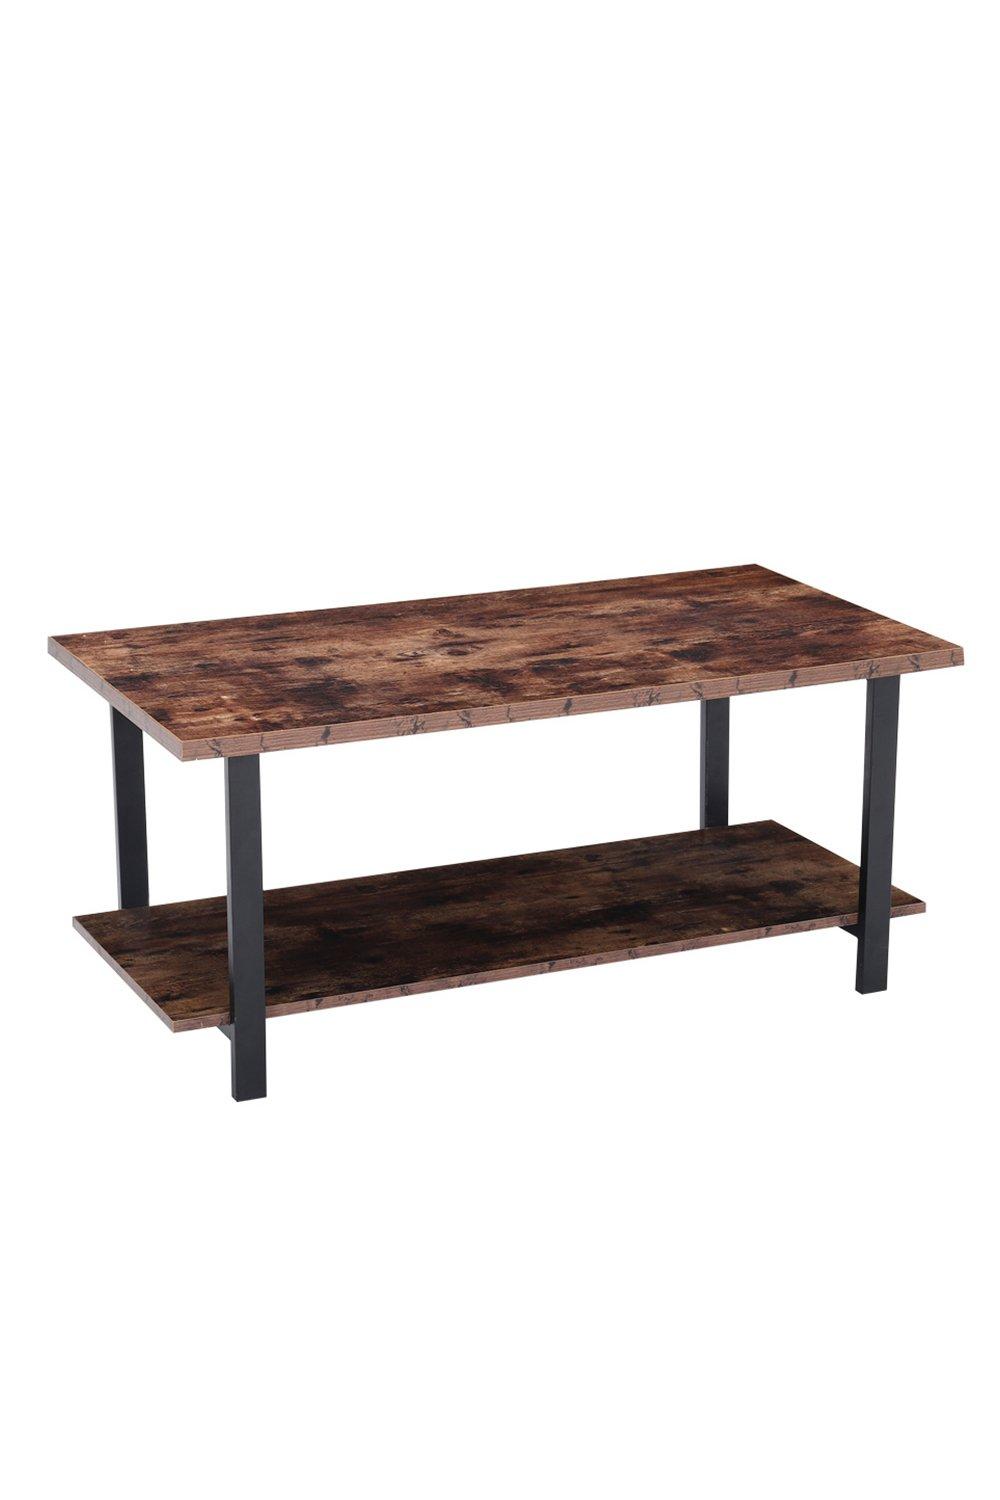 Industrial Style Rustic Coffee Table with Storage Shelf